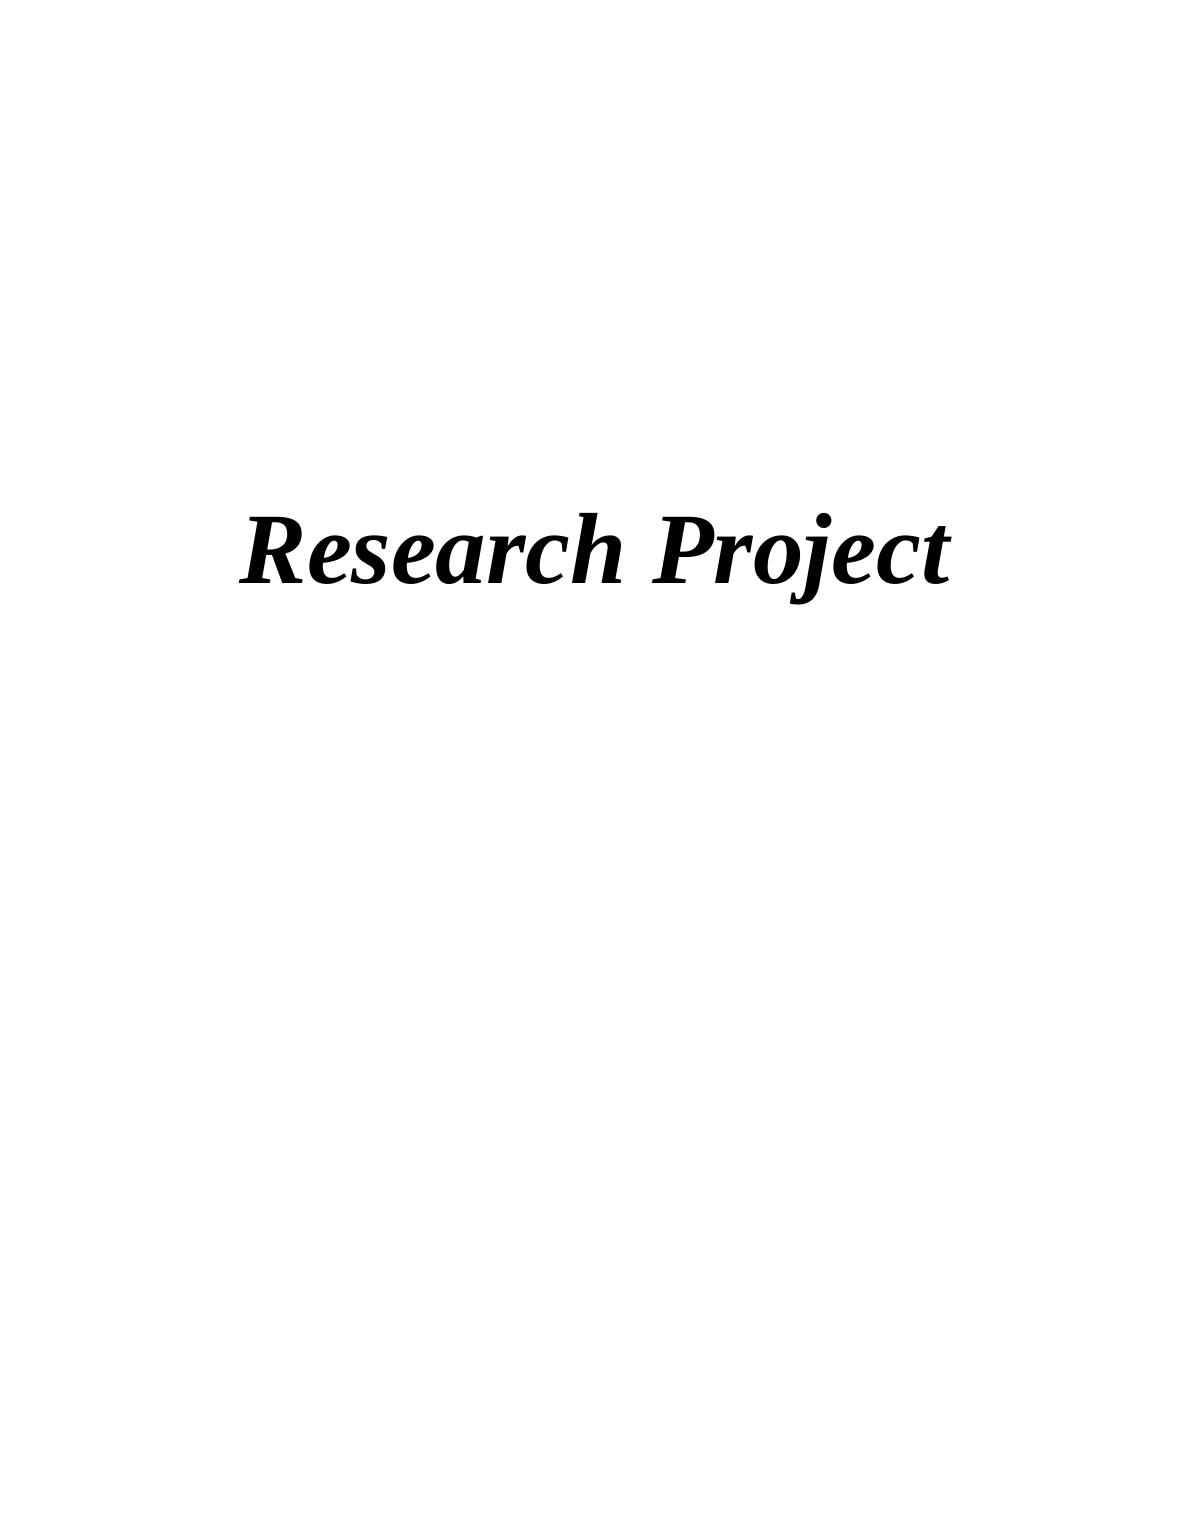 TASK 11 Research Project INTRODUCTION 1 TASK 11 Research Methods 4 TASK 28 Primary and secondary research using appropriate methods for business research_1